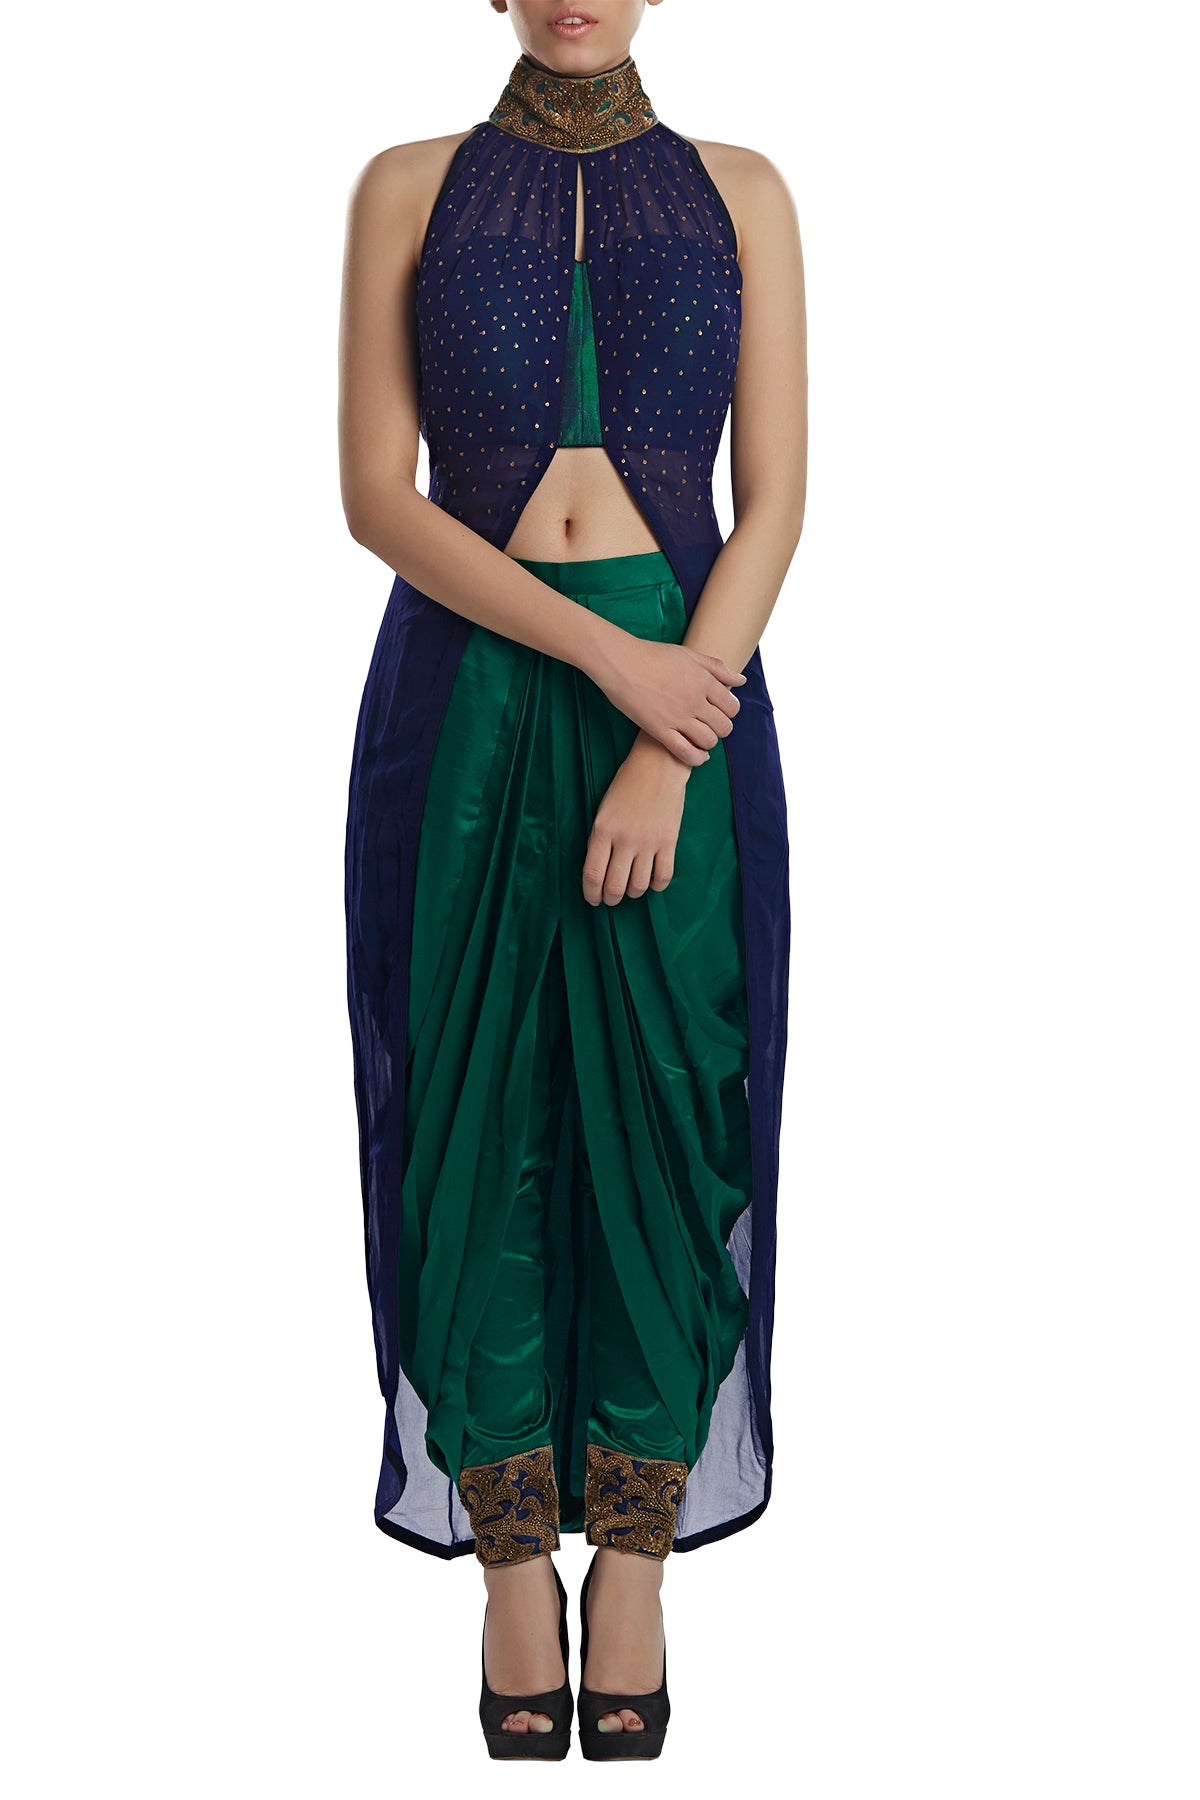 This one's a keeper and should creep into your every wedding suitcase! From welcome dinners to cocktails to evening mehendis when styled right, get your hands on our blue georgette high neck top with satin draped dhoti pants.